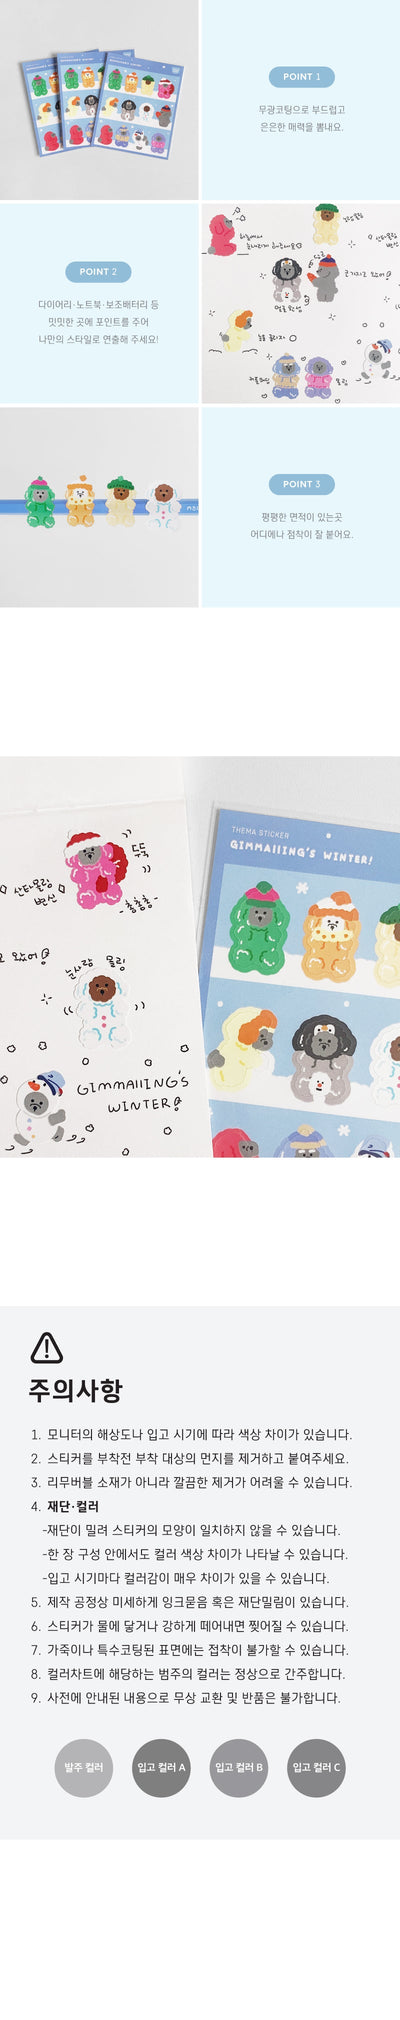 themed stickers malling in winter